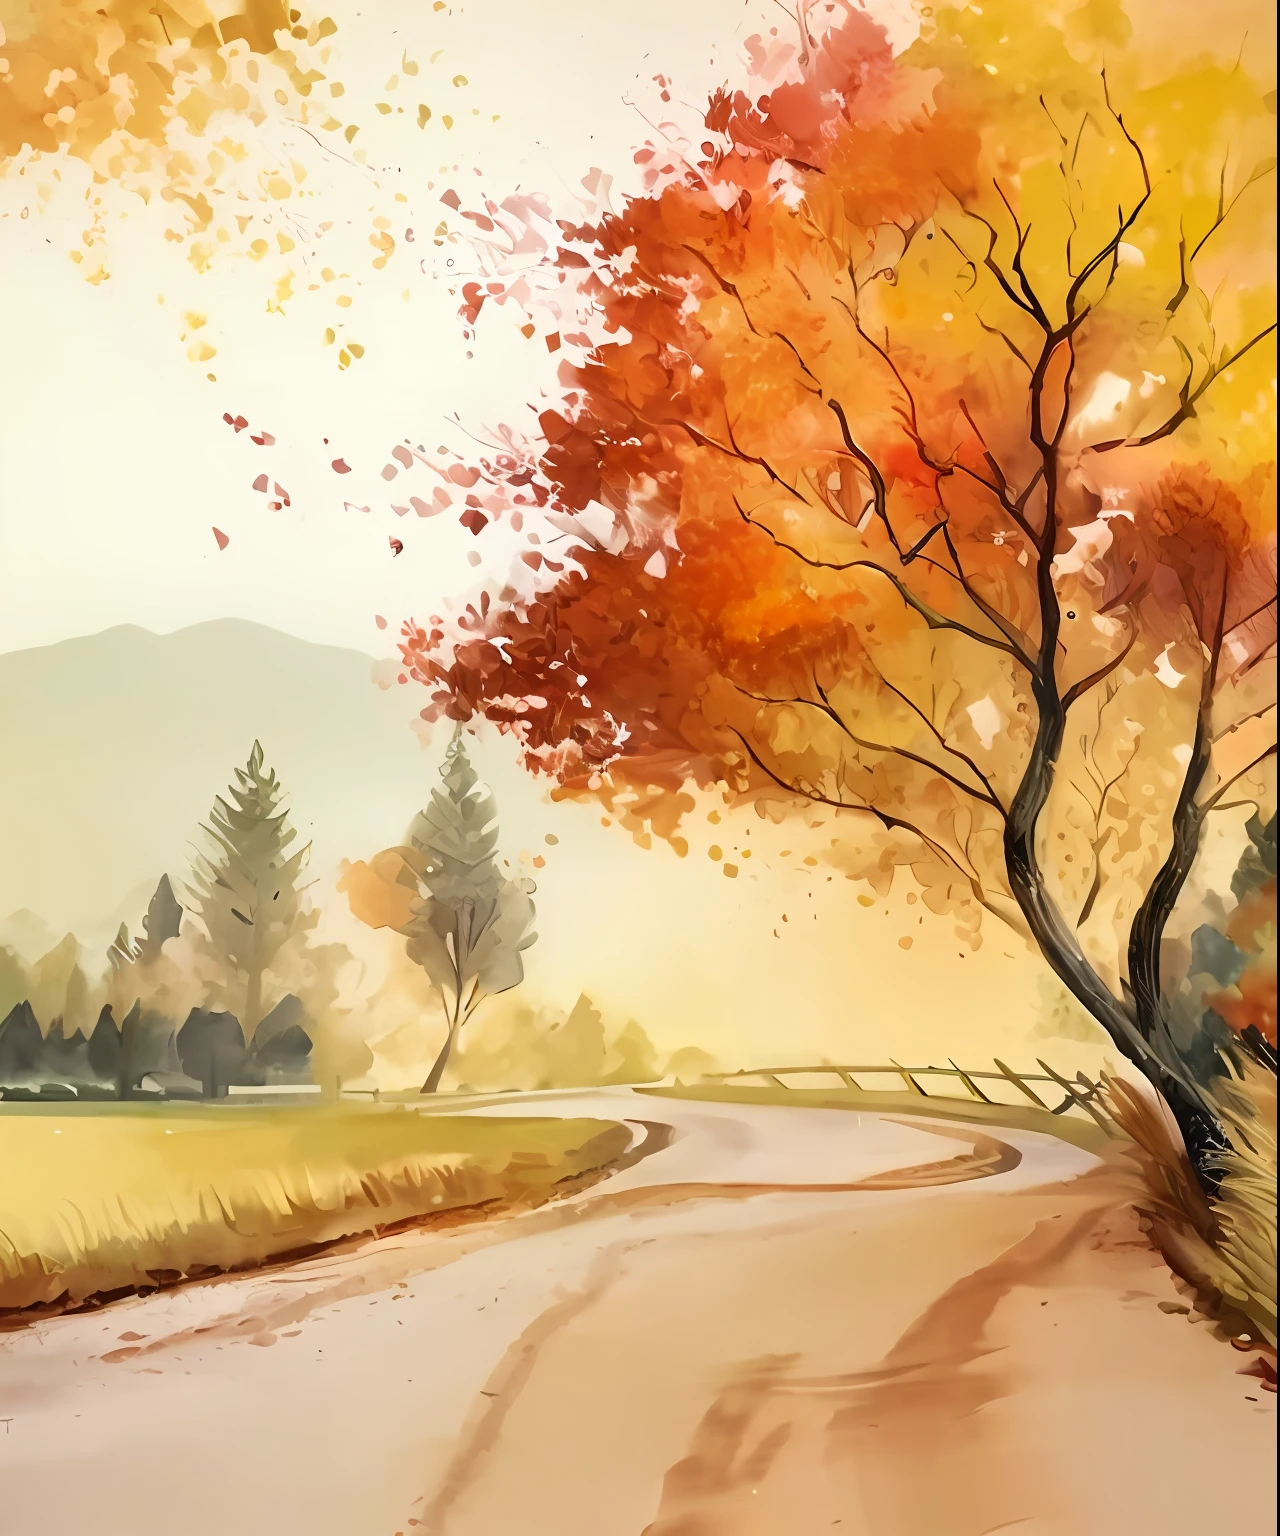 painting of a country road with a tree and a fence, scenery artwork, autumn season, landscape art, nature painting, background artwork, painted landscape, fall season, watercolor digital painting, beautiful art, watercolor painting style, landscape painting, scenery art detailed, inspiring art, digital watercolor painting, 3 d virtual landscape painting, artistic landscape, digital landscape art, digital art painting